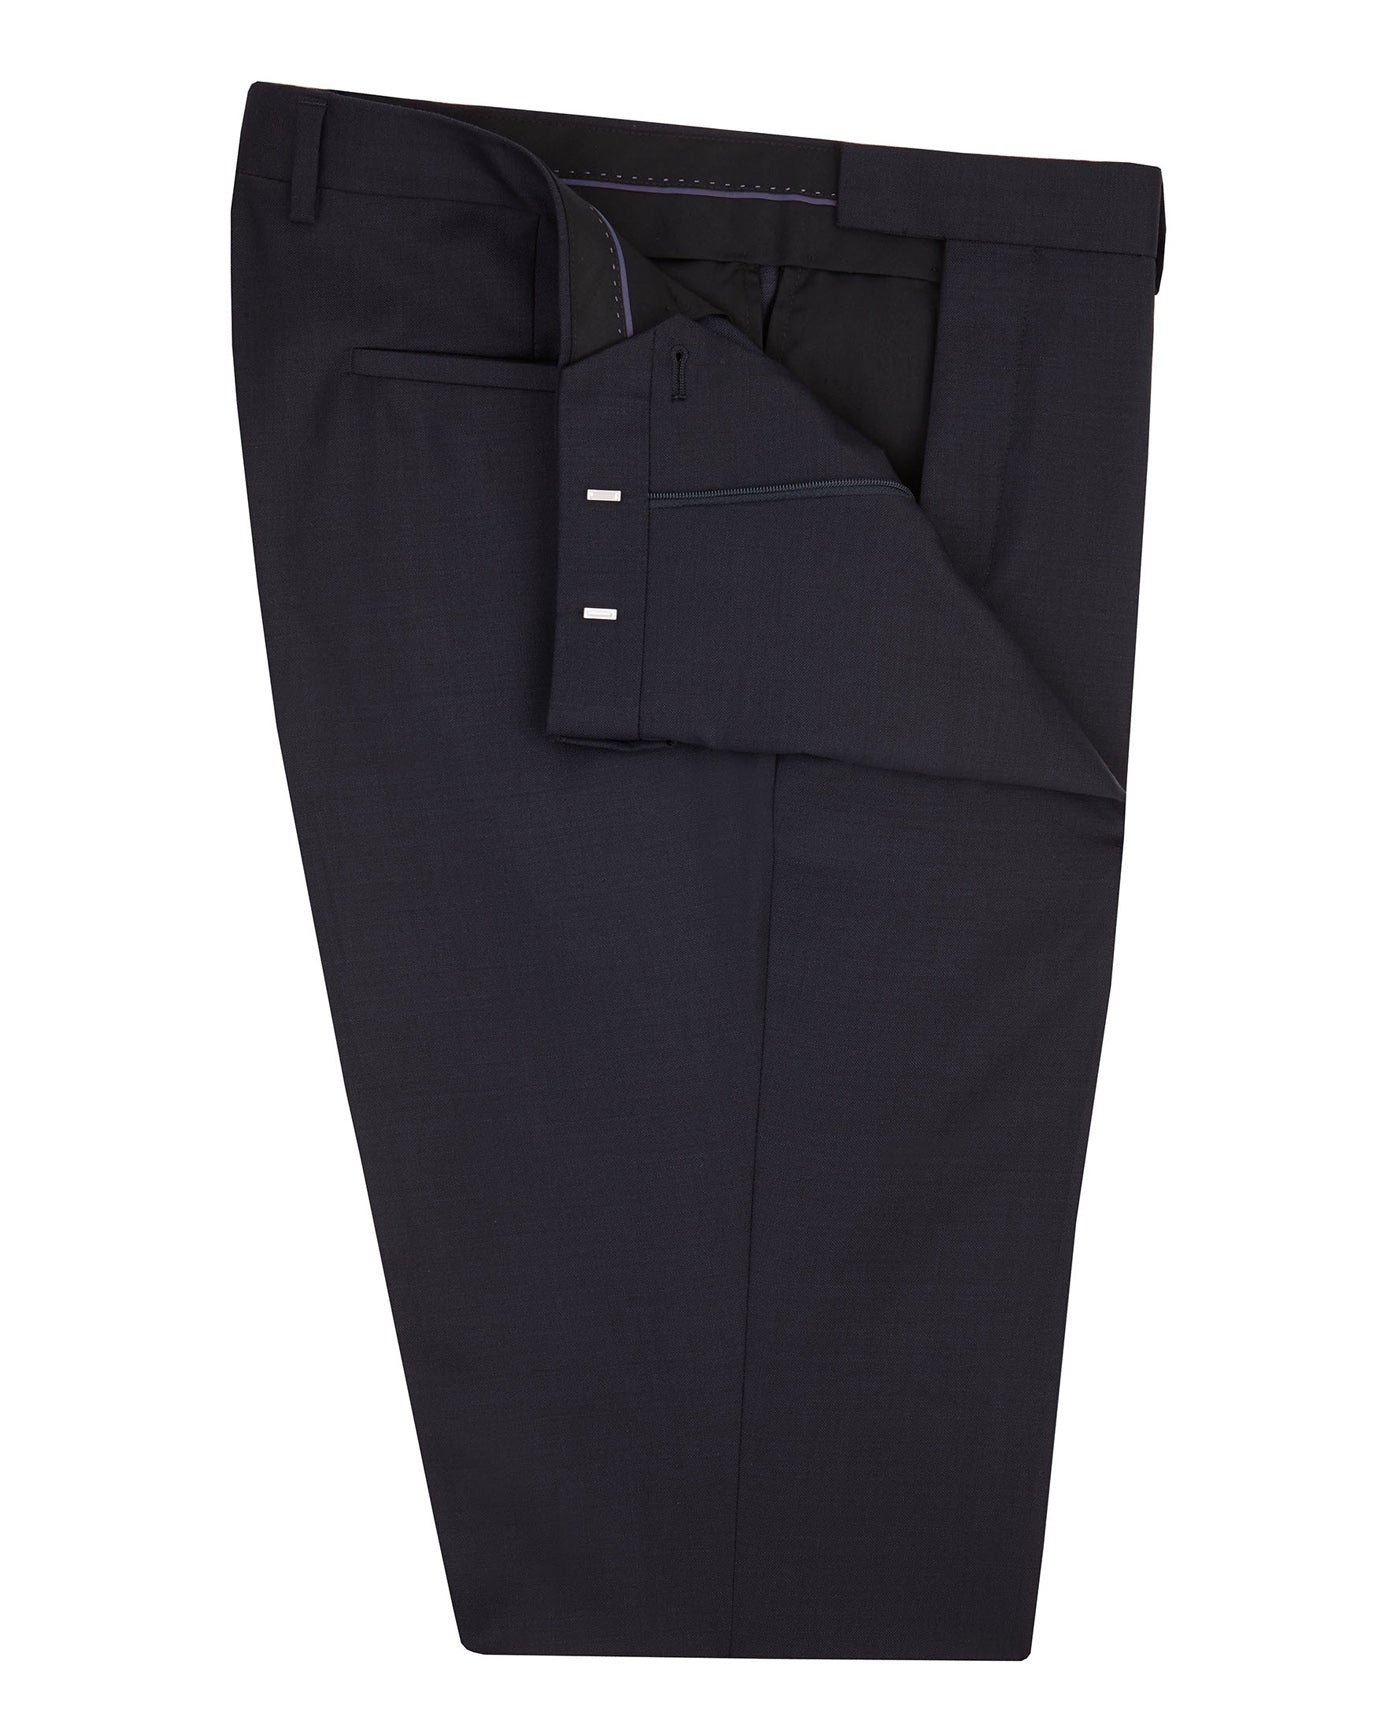 Image 1 of Flat Front Thornberry Semi-Plain Navy Trousers